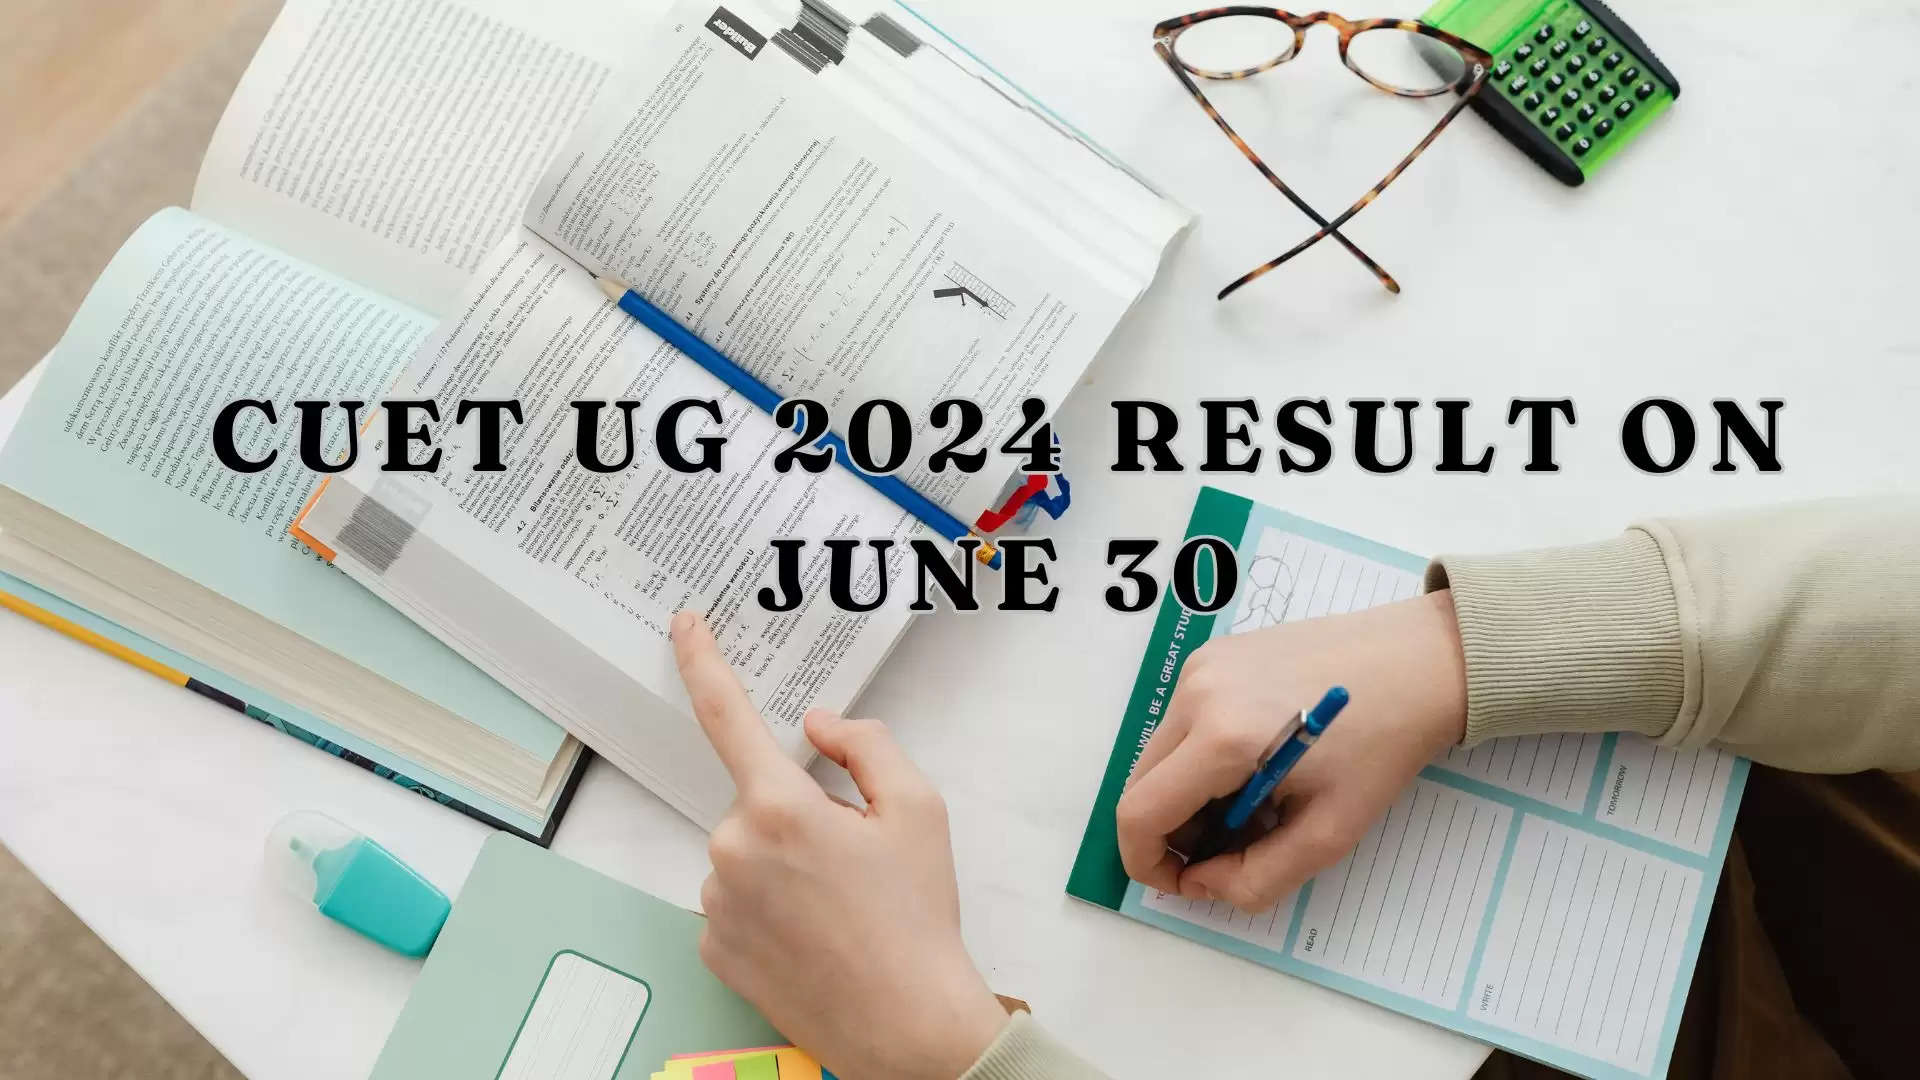 CUET UG 2024 Result and Answer Key 